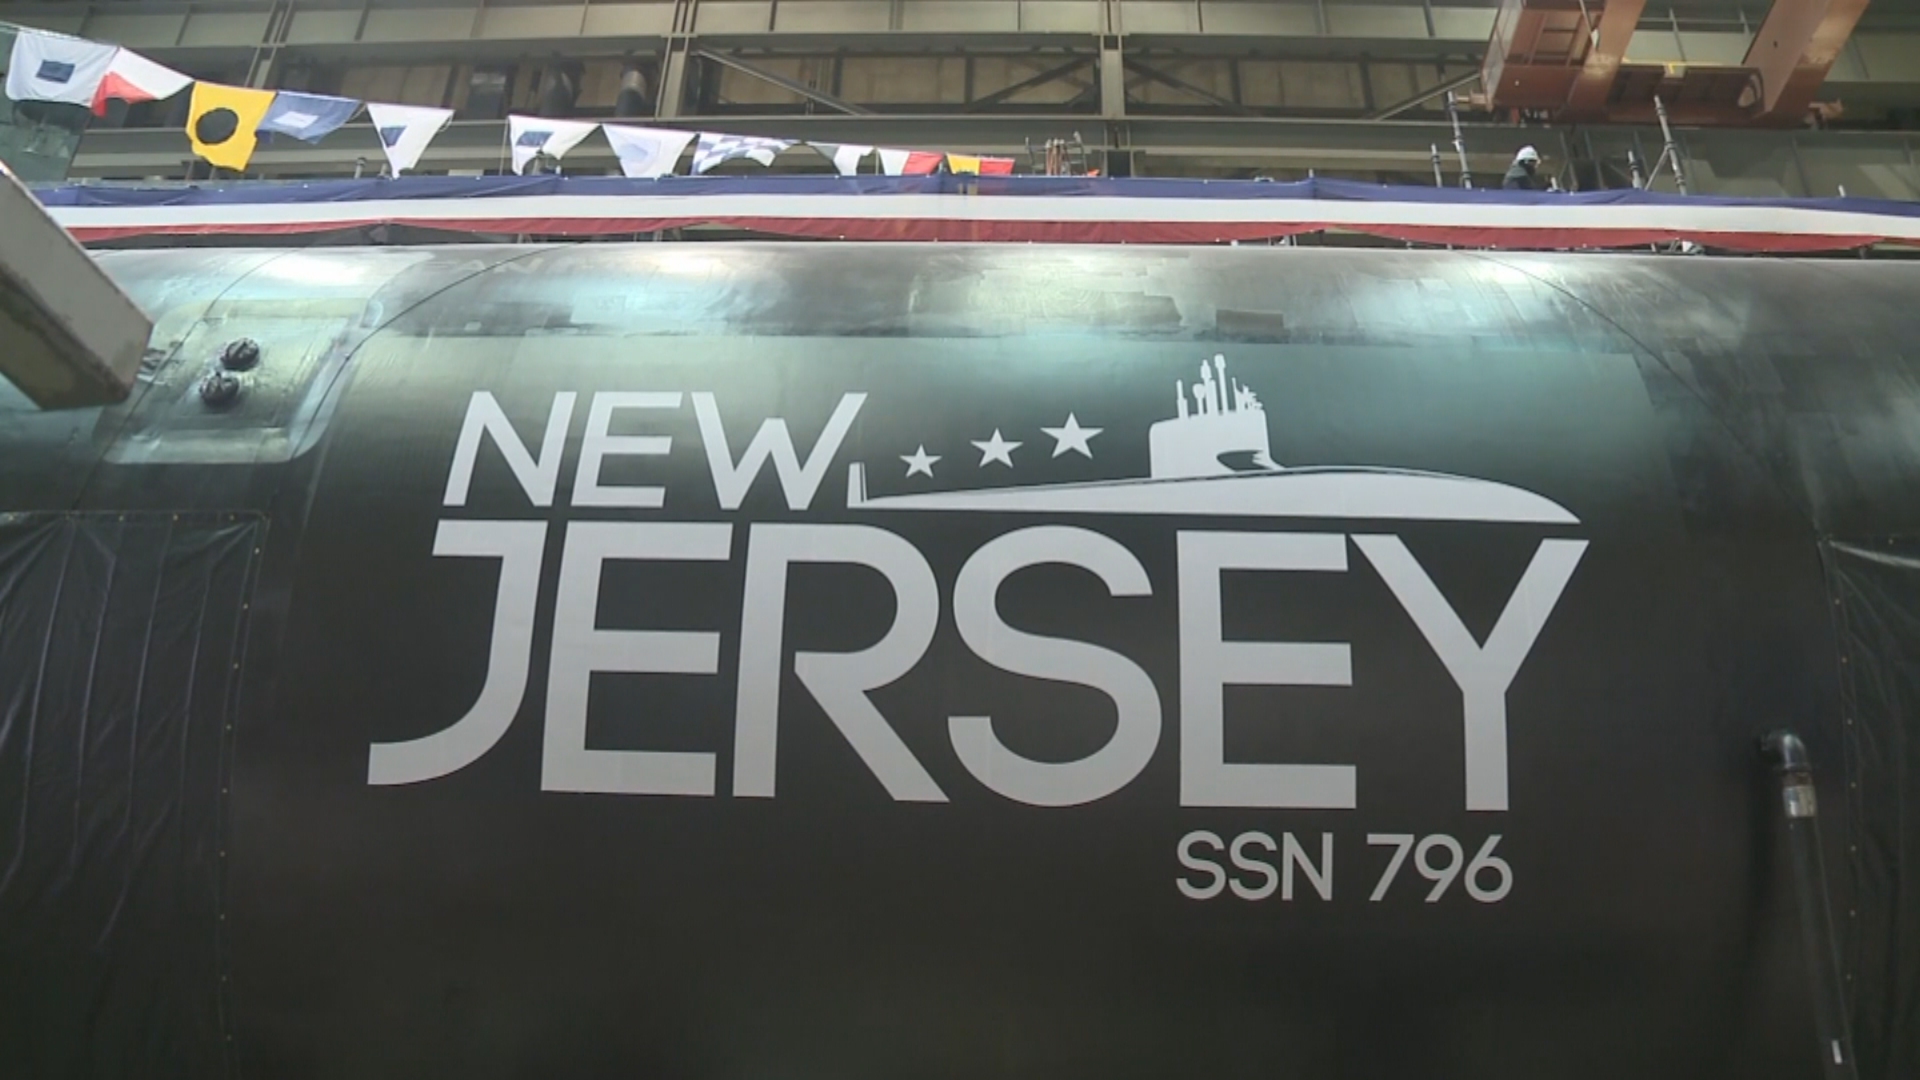 New USS New Jersey Will Be Christened By Navy Saturday